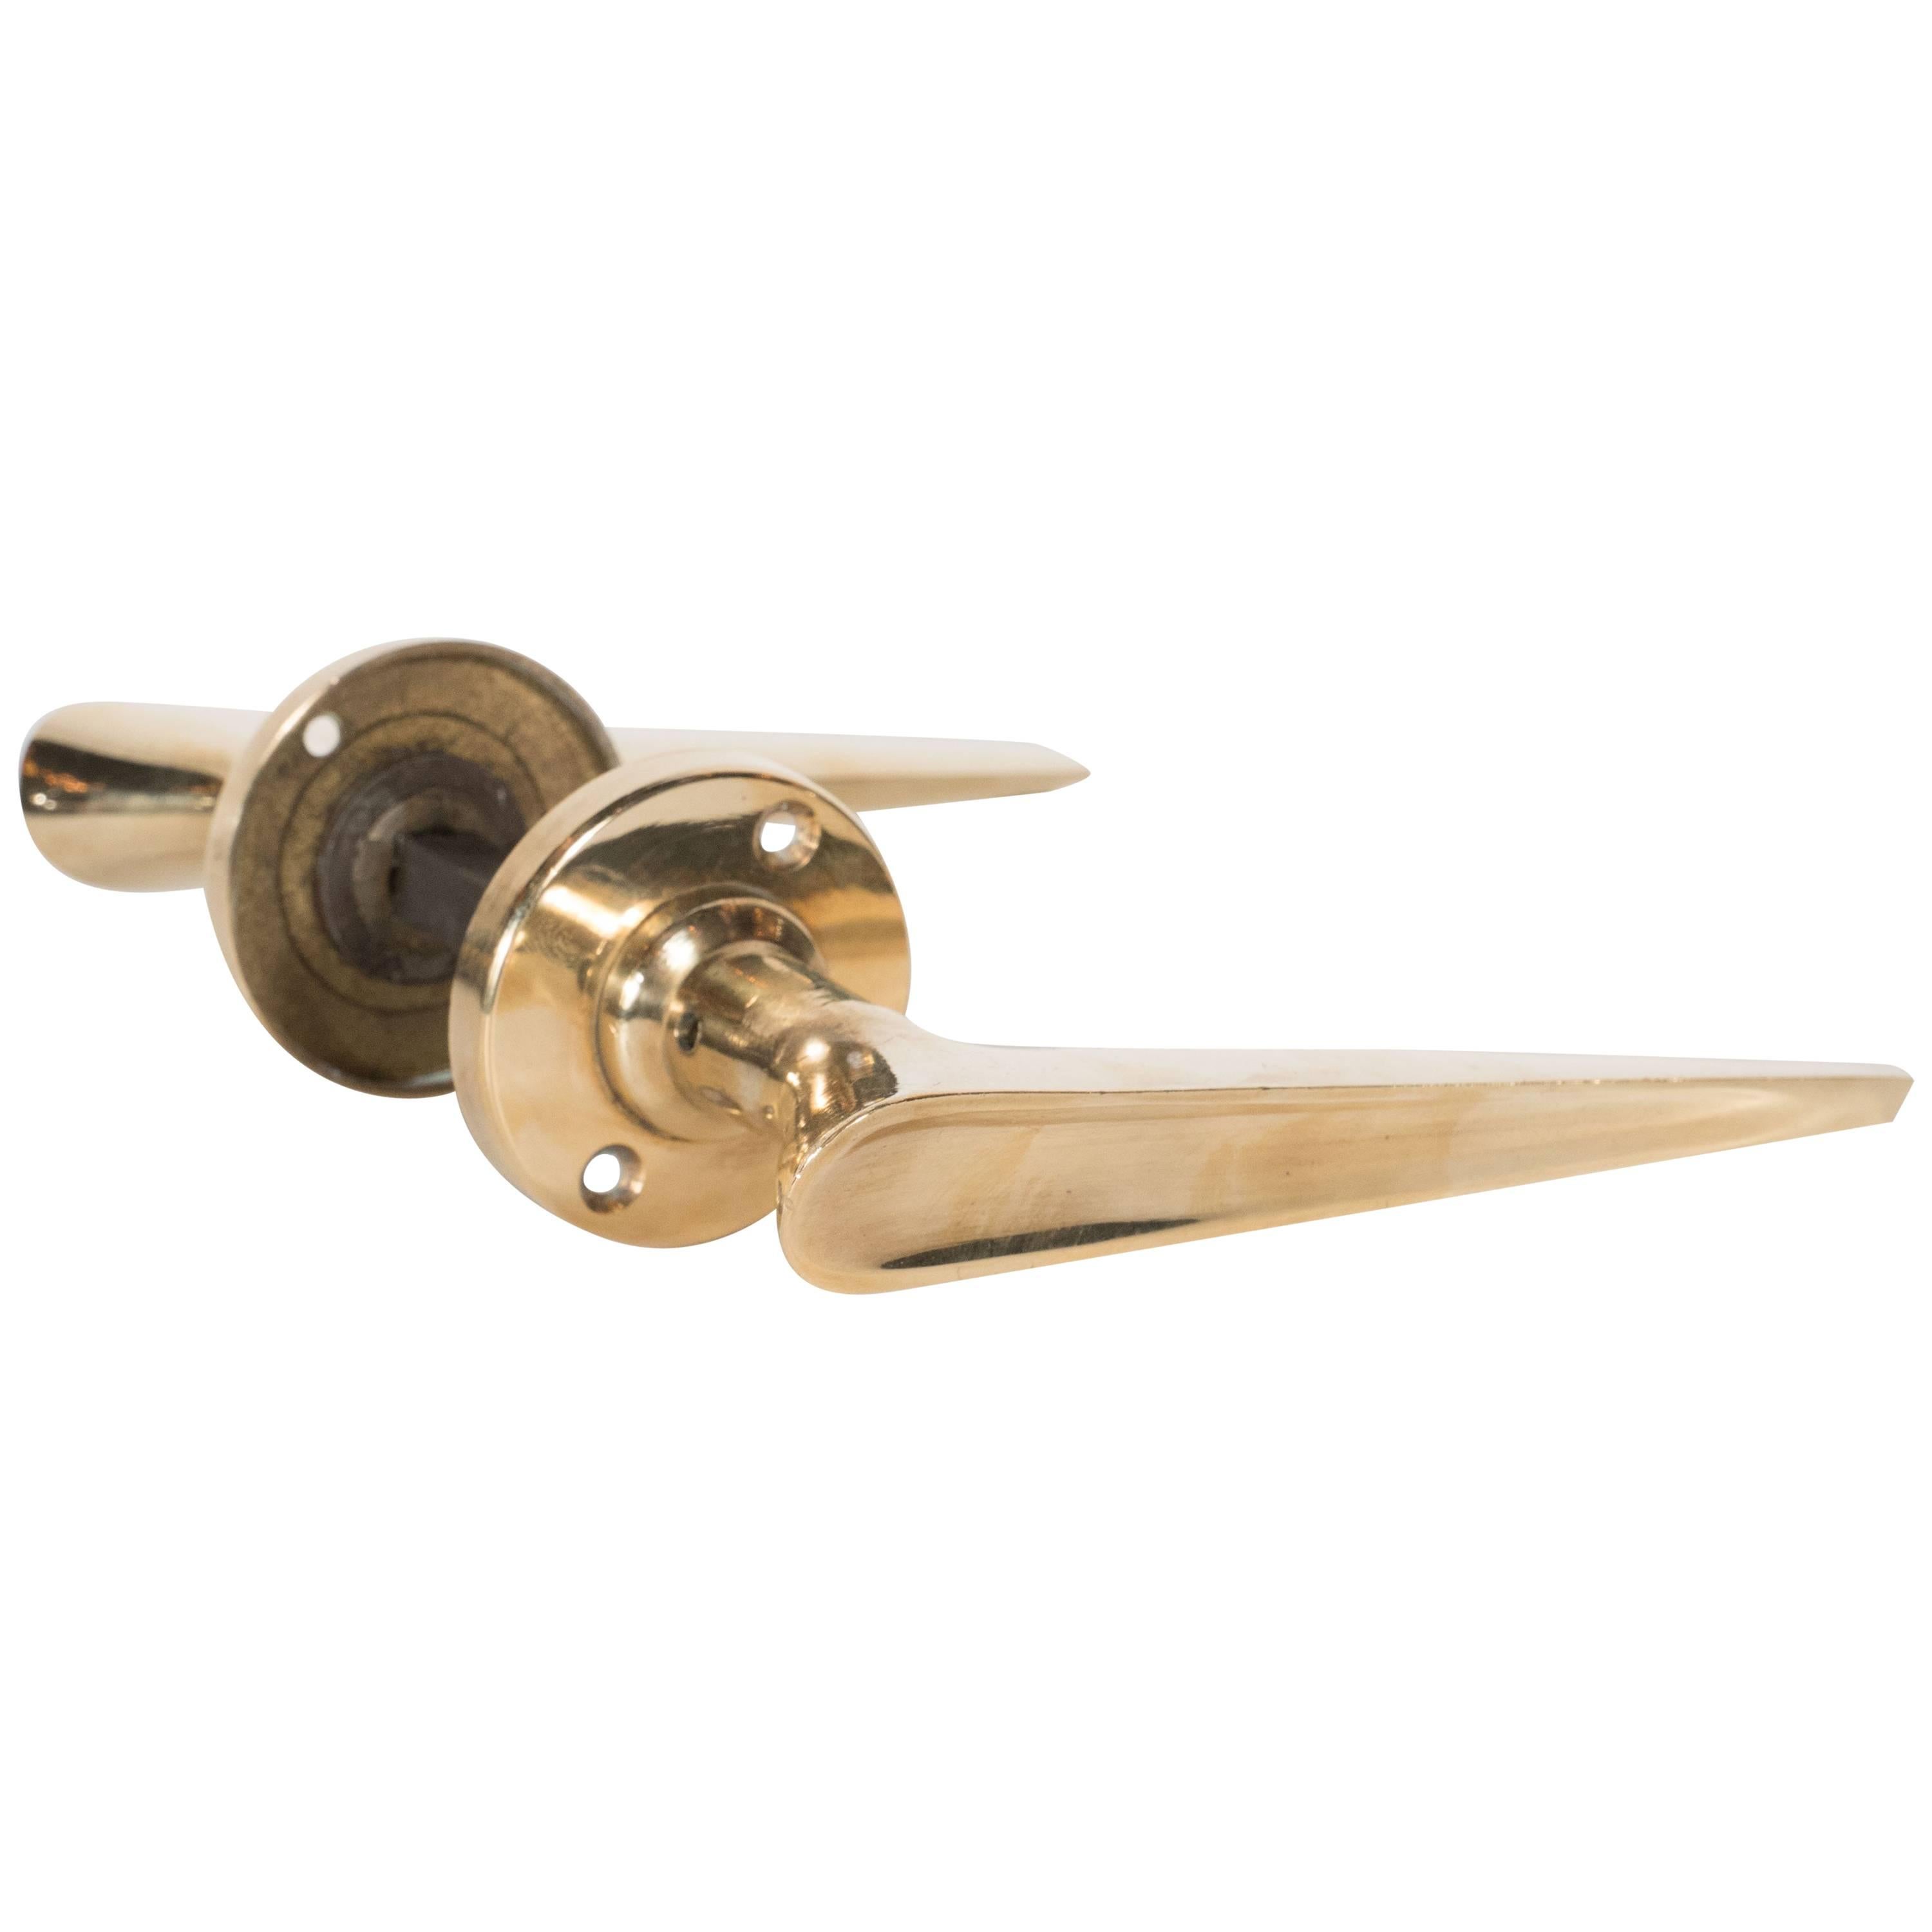 Seven Mid-Century Modern Polished Brass Door Handles in the Manner of Gio Ponti